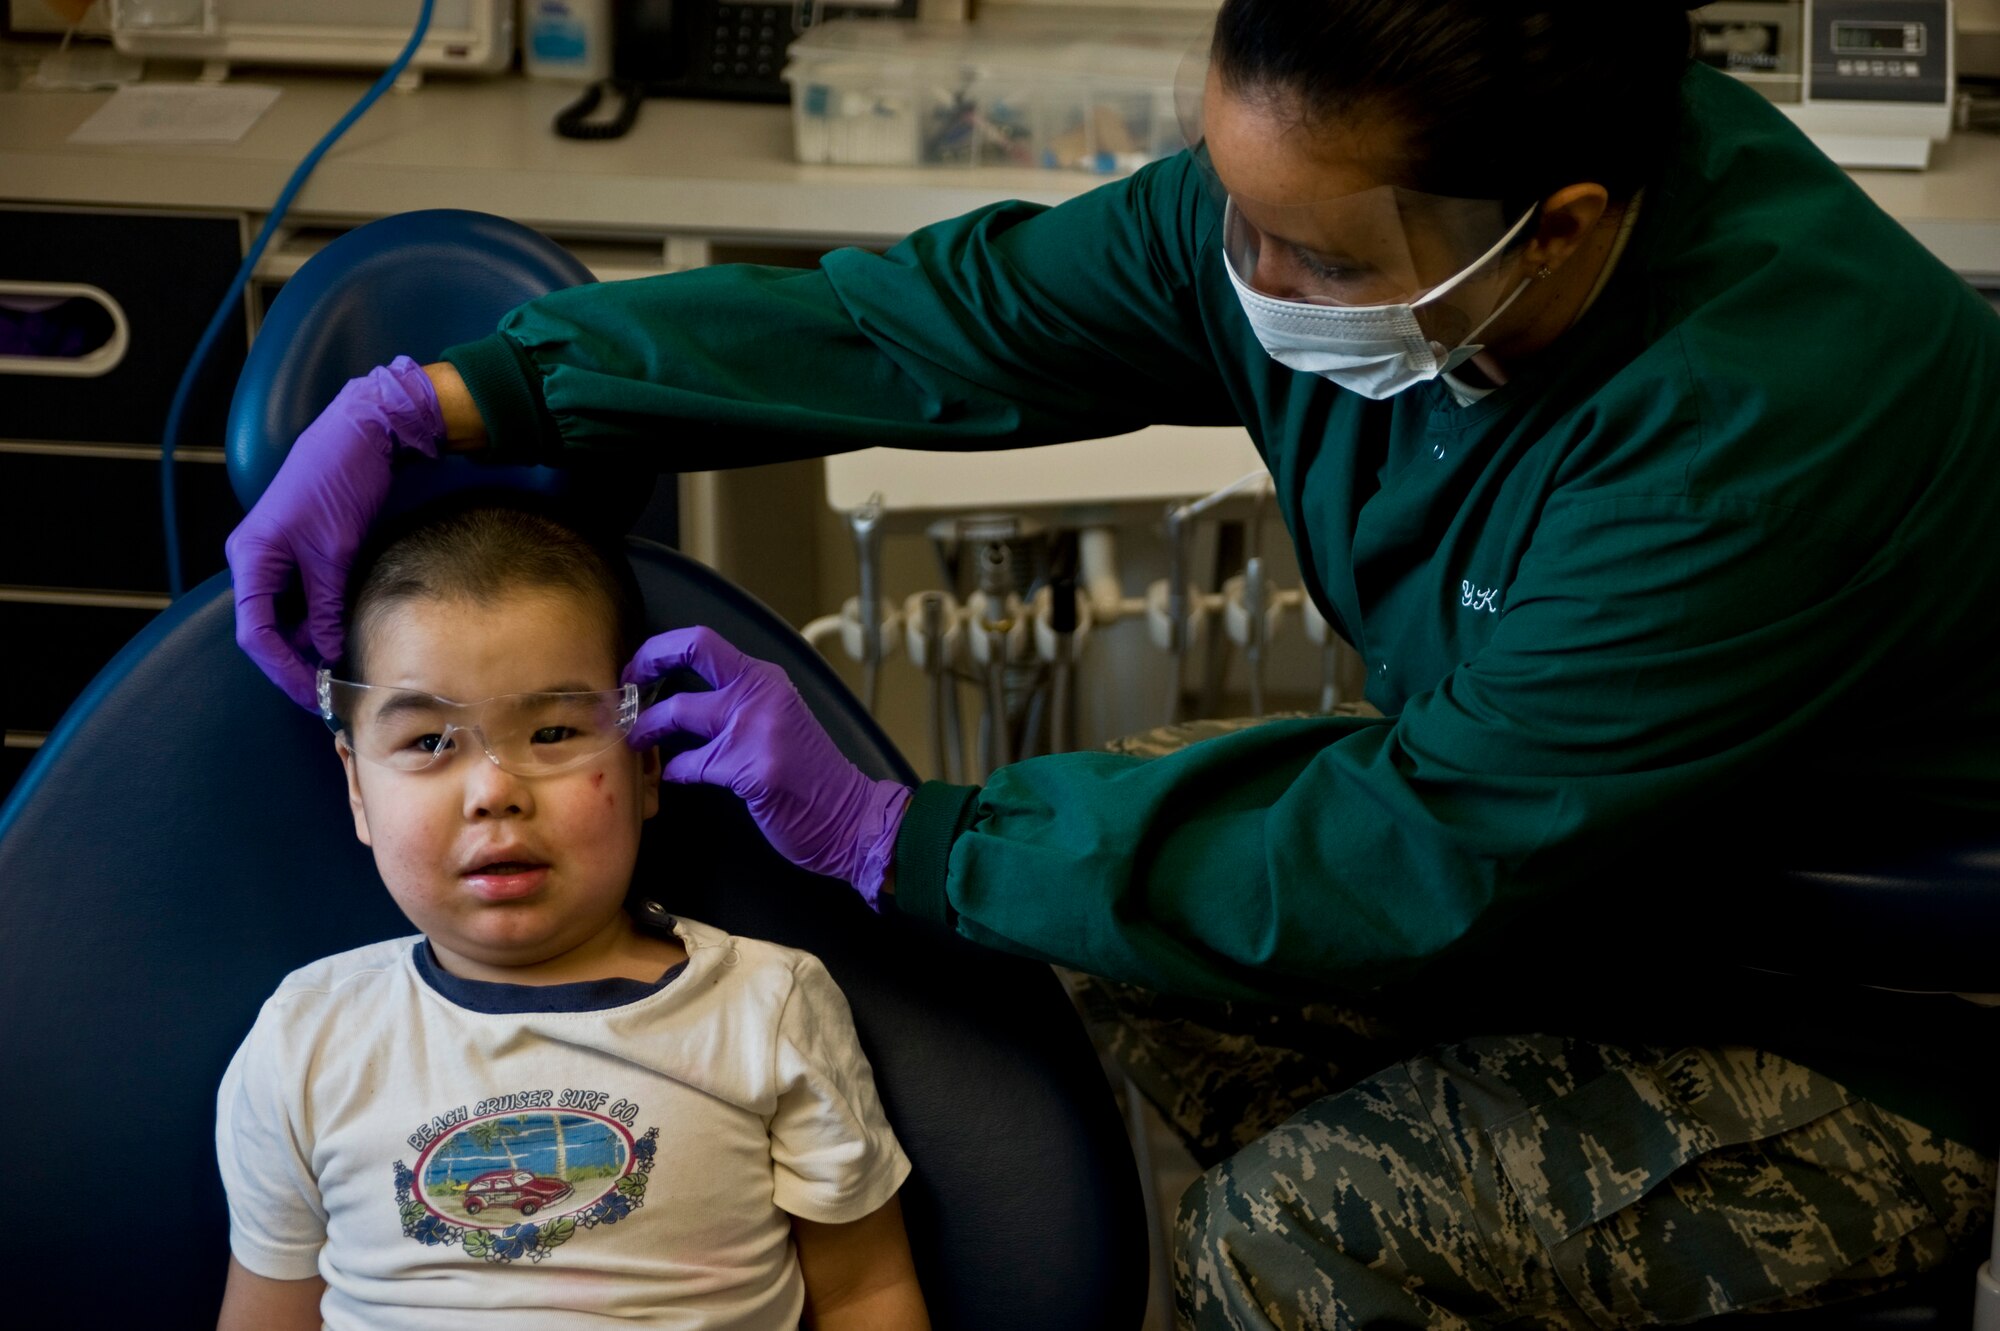 Tech. Sgt. Kristie Subieta, a dental hygenist assigned to the 507th Medical Squadron at Tinker Air Force Base, adjusts protective eye glasses on Dylon Sergie, 2, at a health clinic in Kwethluk, Alaska, on March 10, 2009. A joint military medical team is deployed to Kwethluk, a small village in Western Alaska, in support of Operation Arctic Care. This year's Navy-led mission has teams in 11 villages in Alaska's Yukon-Kuskokwim Delta region providing medical, dental and veterinary support at no cost to Alaskan natives. (U.S. Air Force photo by Senior Airman Christopher Griffin)